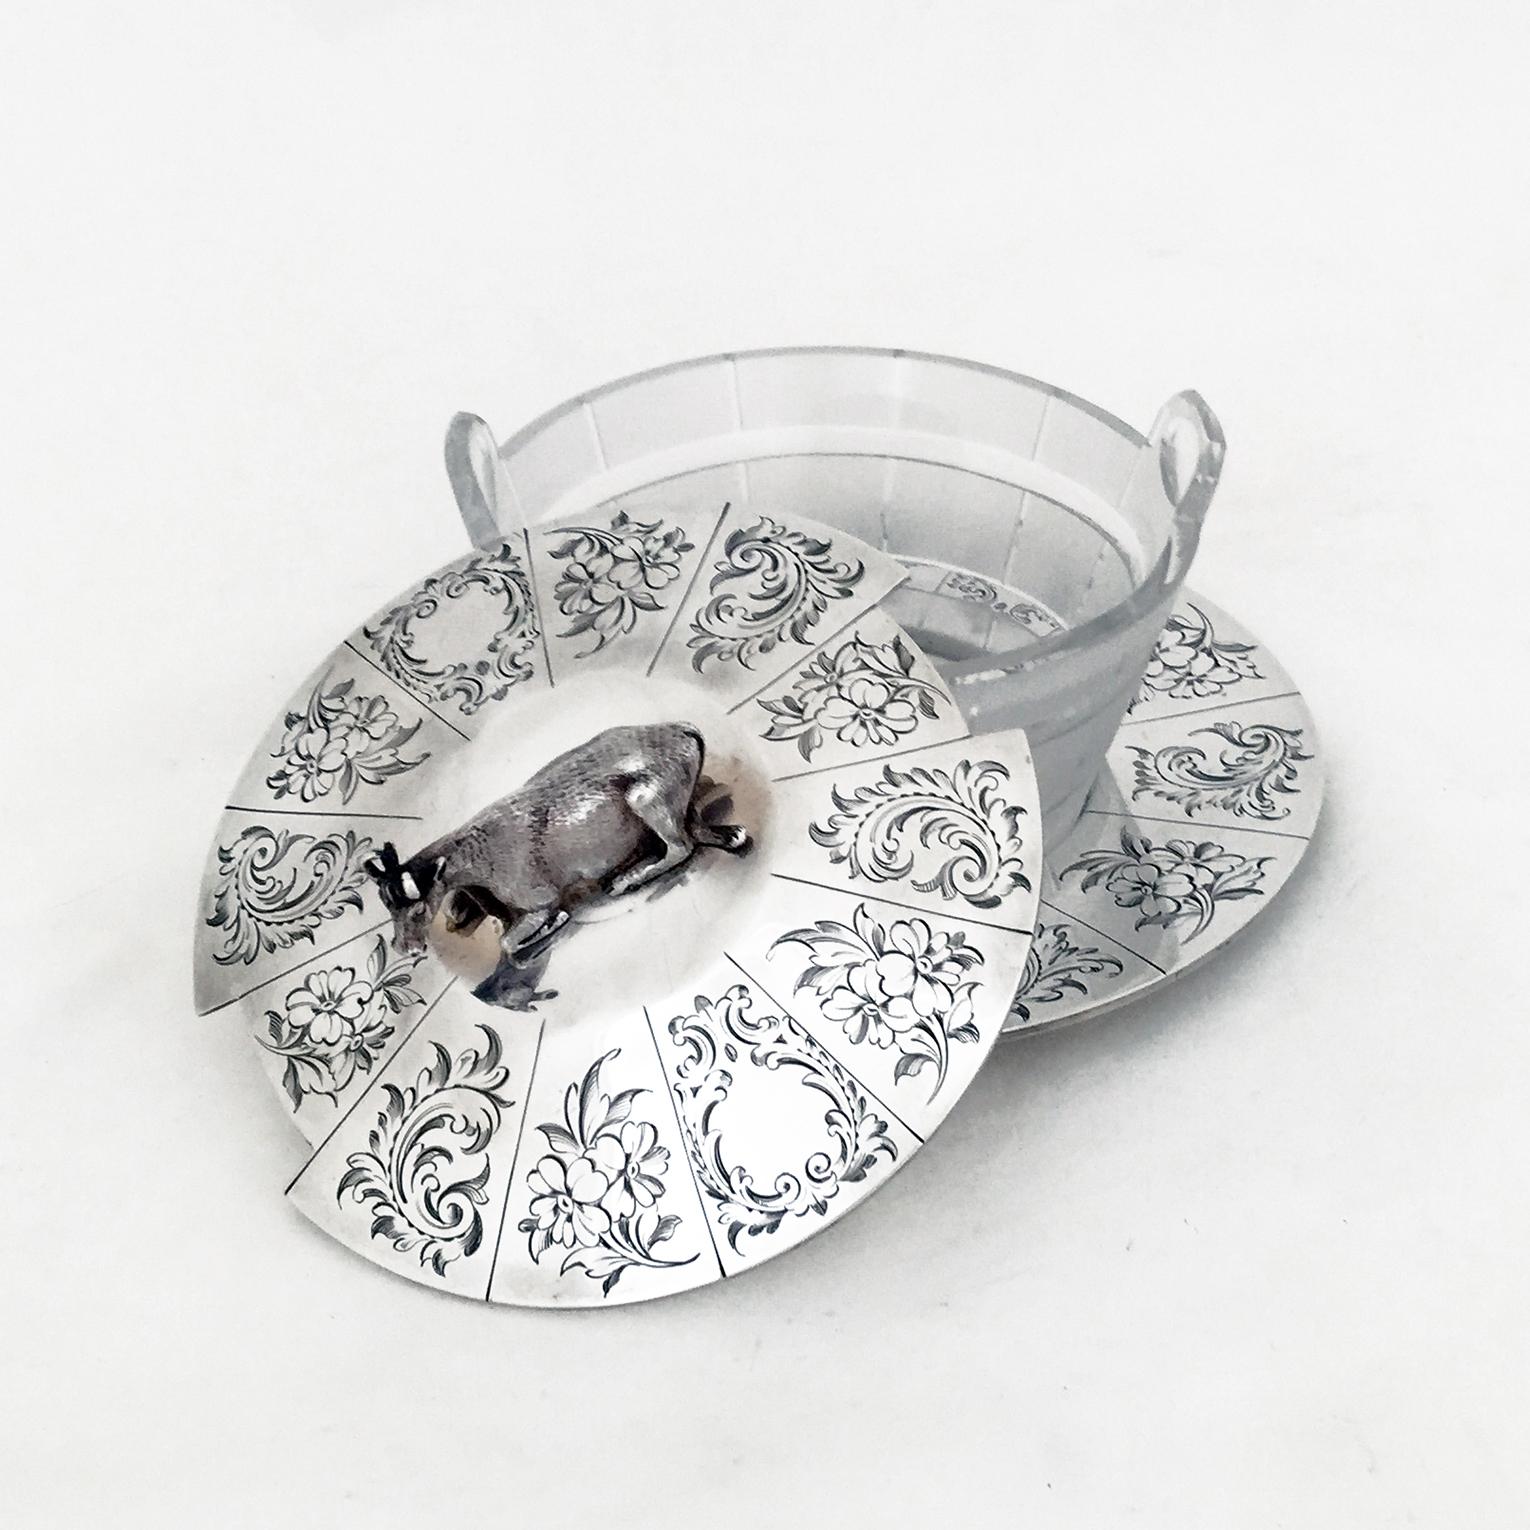 An early Victorian English silver butter dish with the original frosted glass holder.

The lid and plate of the dish have bright cut engraving - decoration typical of the period.

All the different parts- finial, screw, dish , lid - all carry